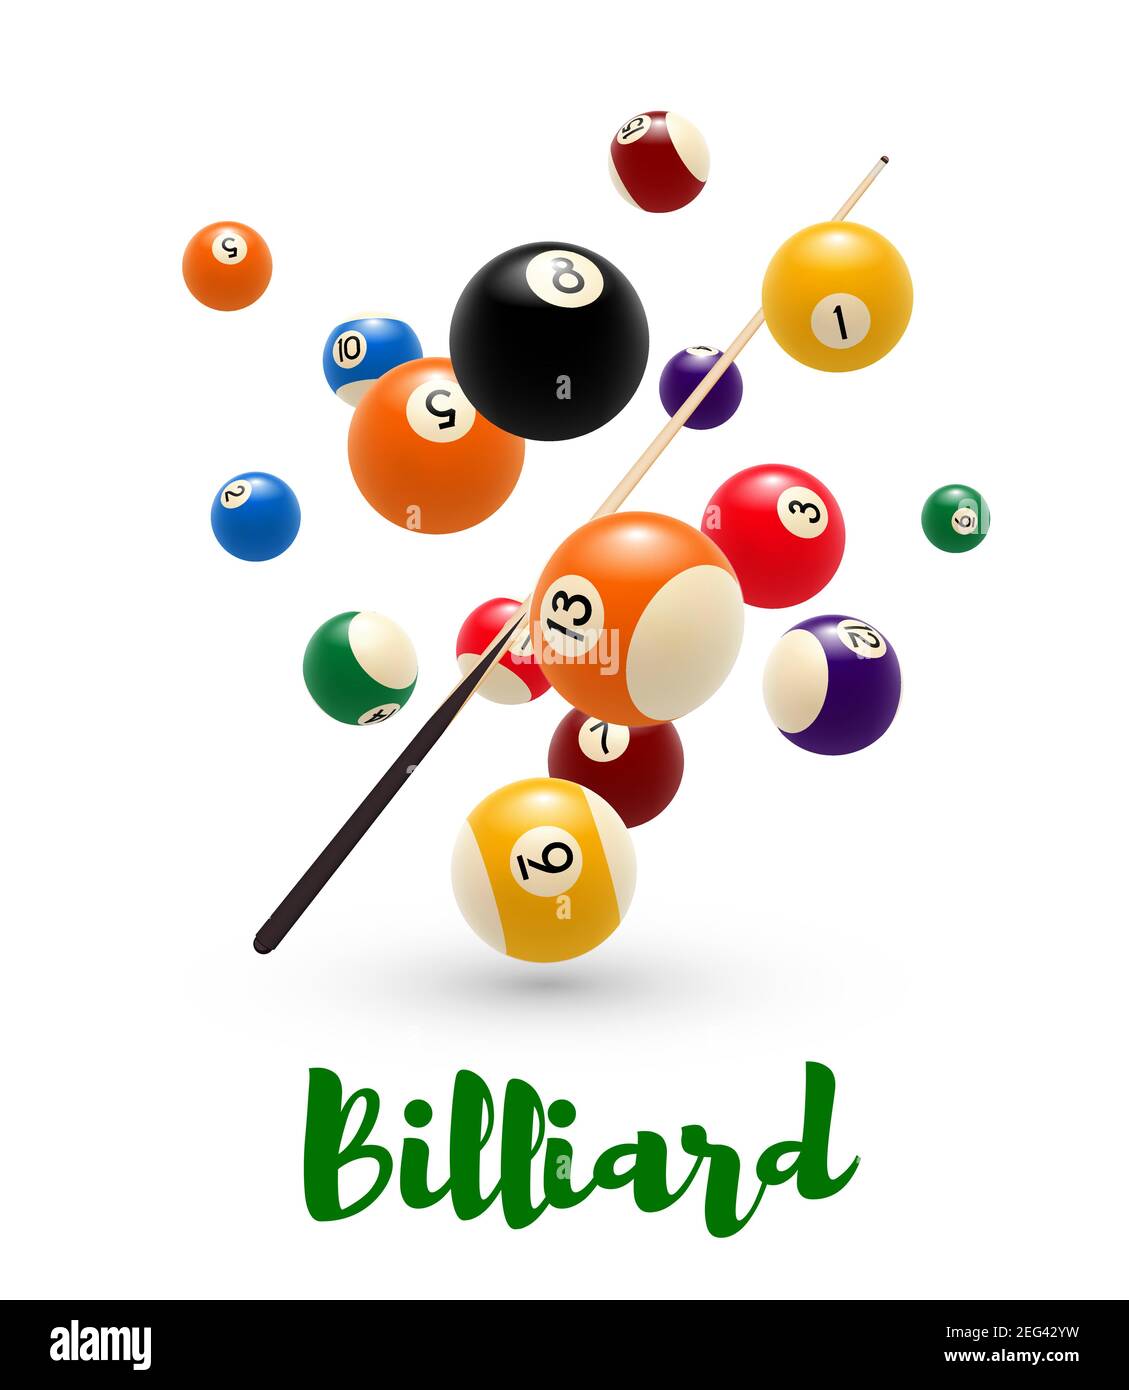 Billiard ball and cue poster. Billiards sport game tournament or snooker competition banner of colorful pool ball with numbers and billiard cue 3d ill Stock Vector